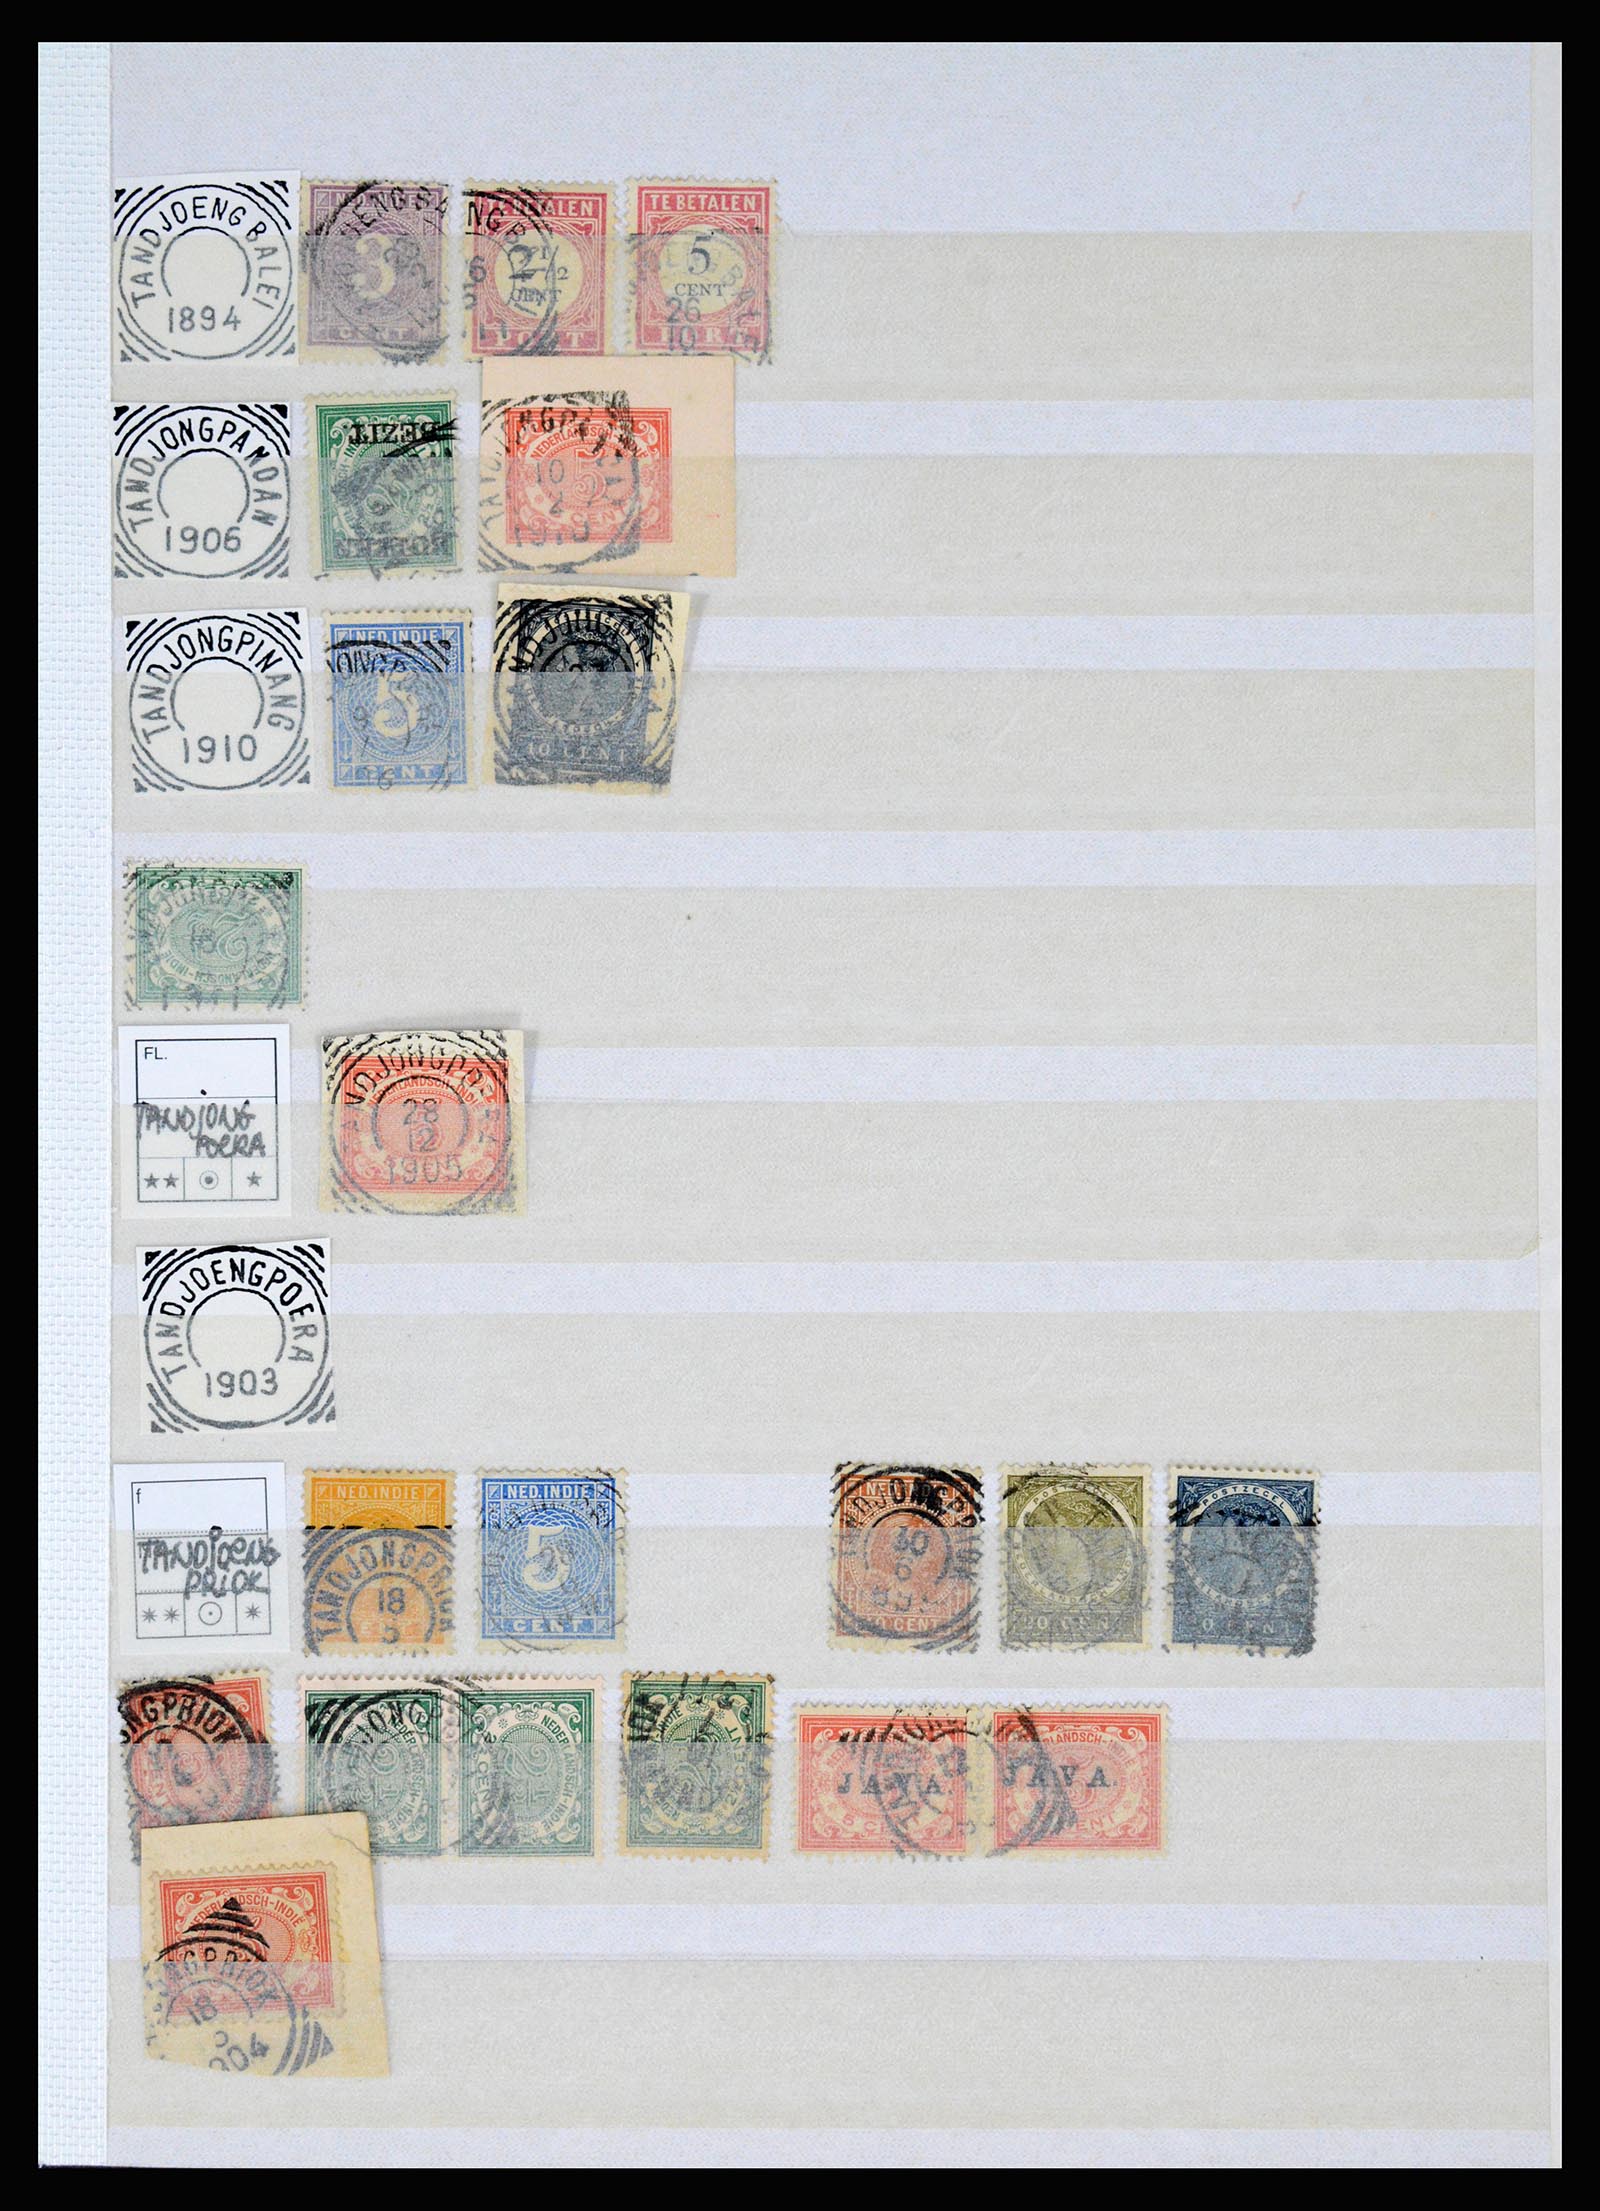 36839 094 - Stamp collection 36839 Dutch east Indies square cancels.